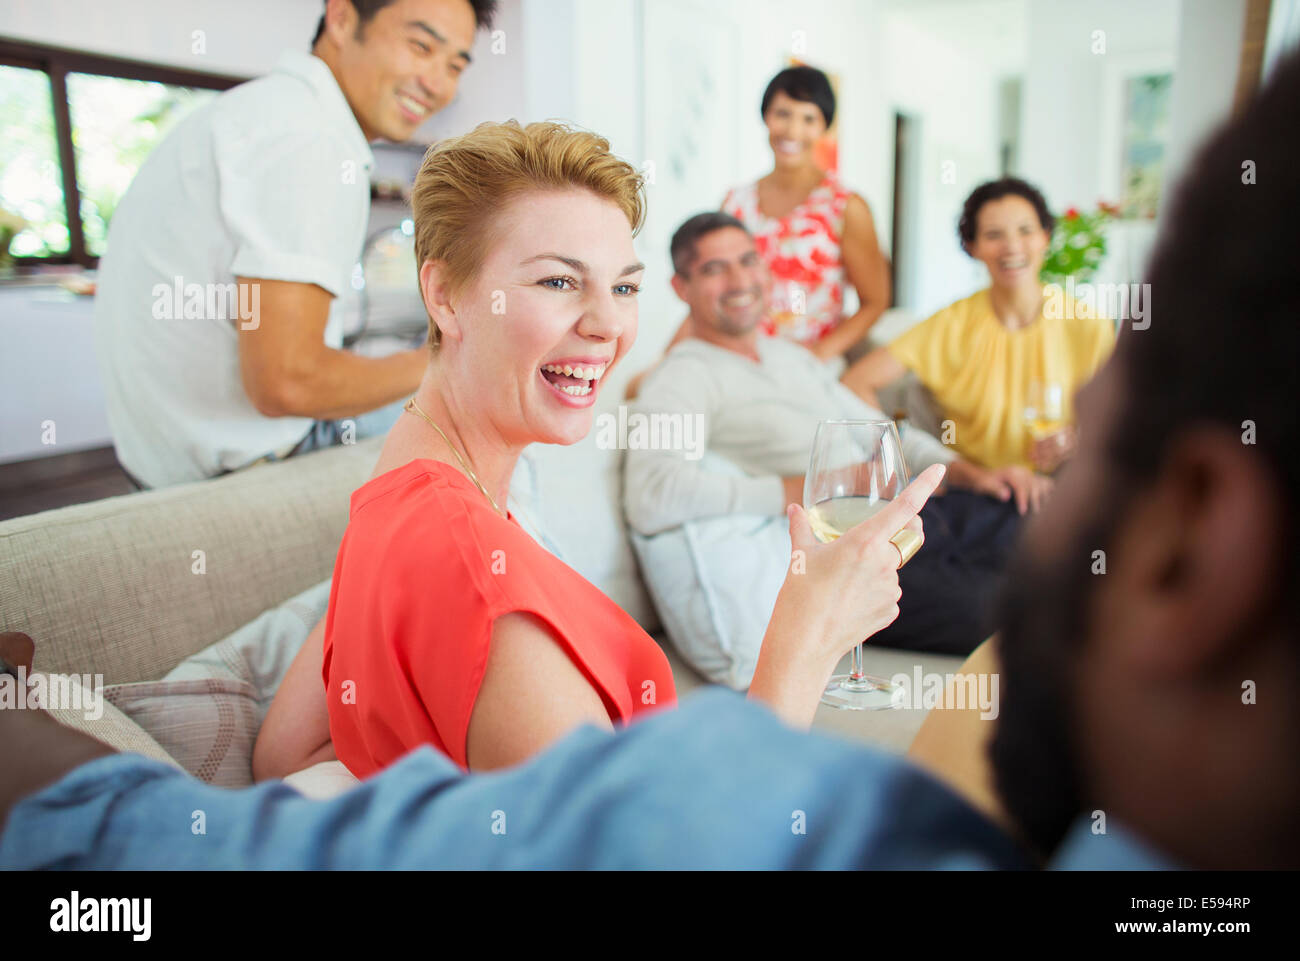 Friends laughing together at party Stock Photo